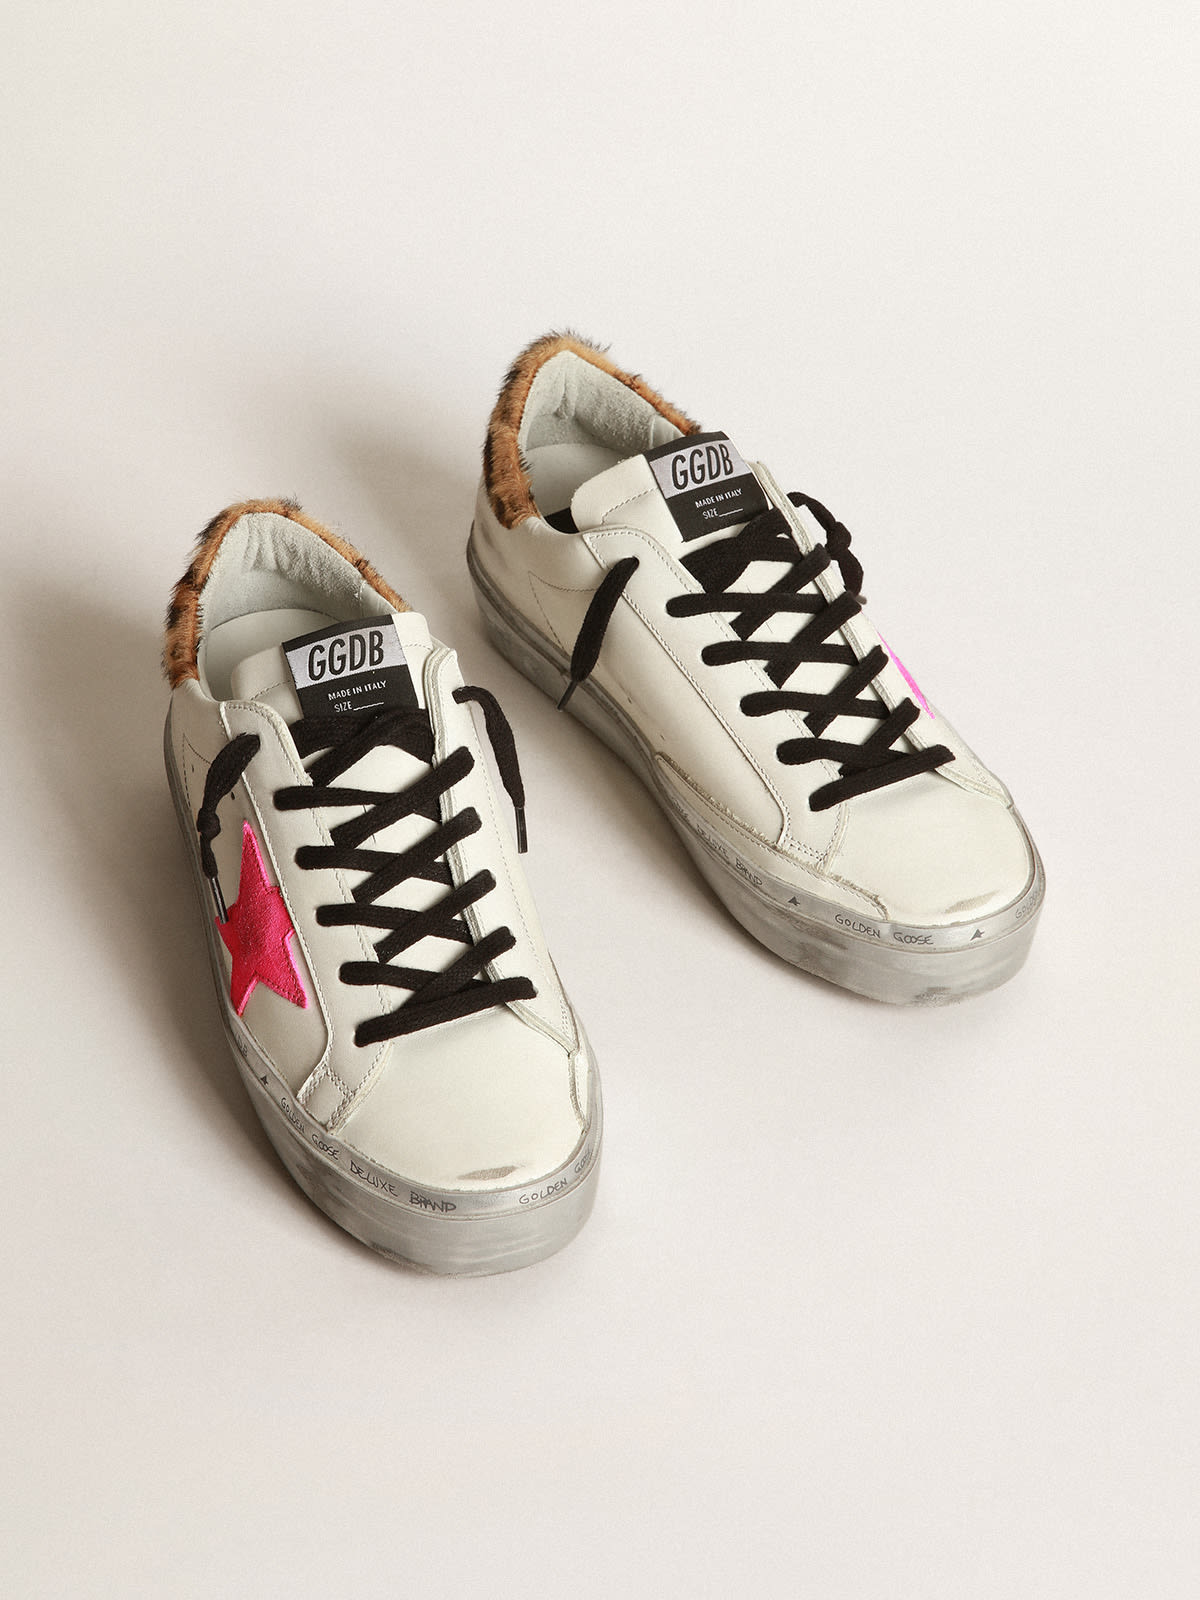 Golden Goose - Hi Star sneakers with fuchsia star and leopard-print heel tab in 